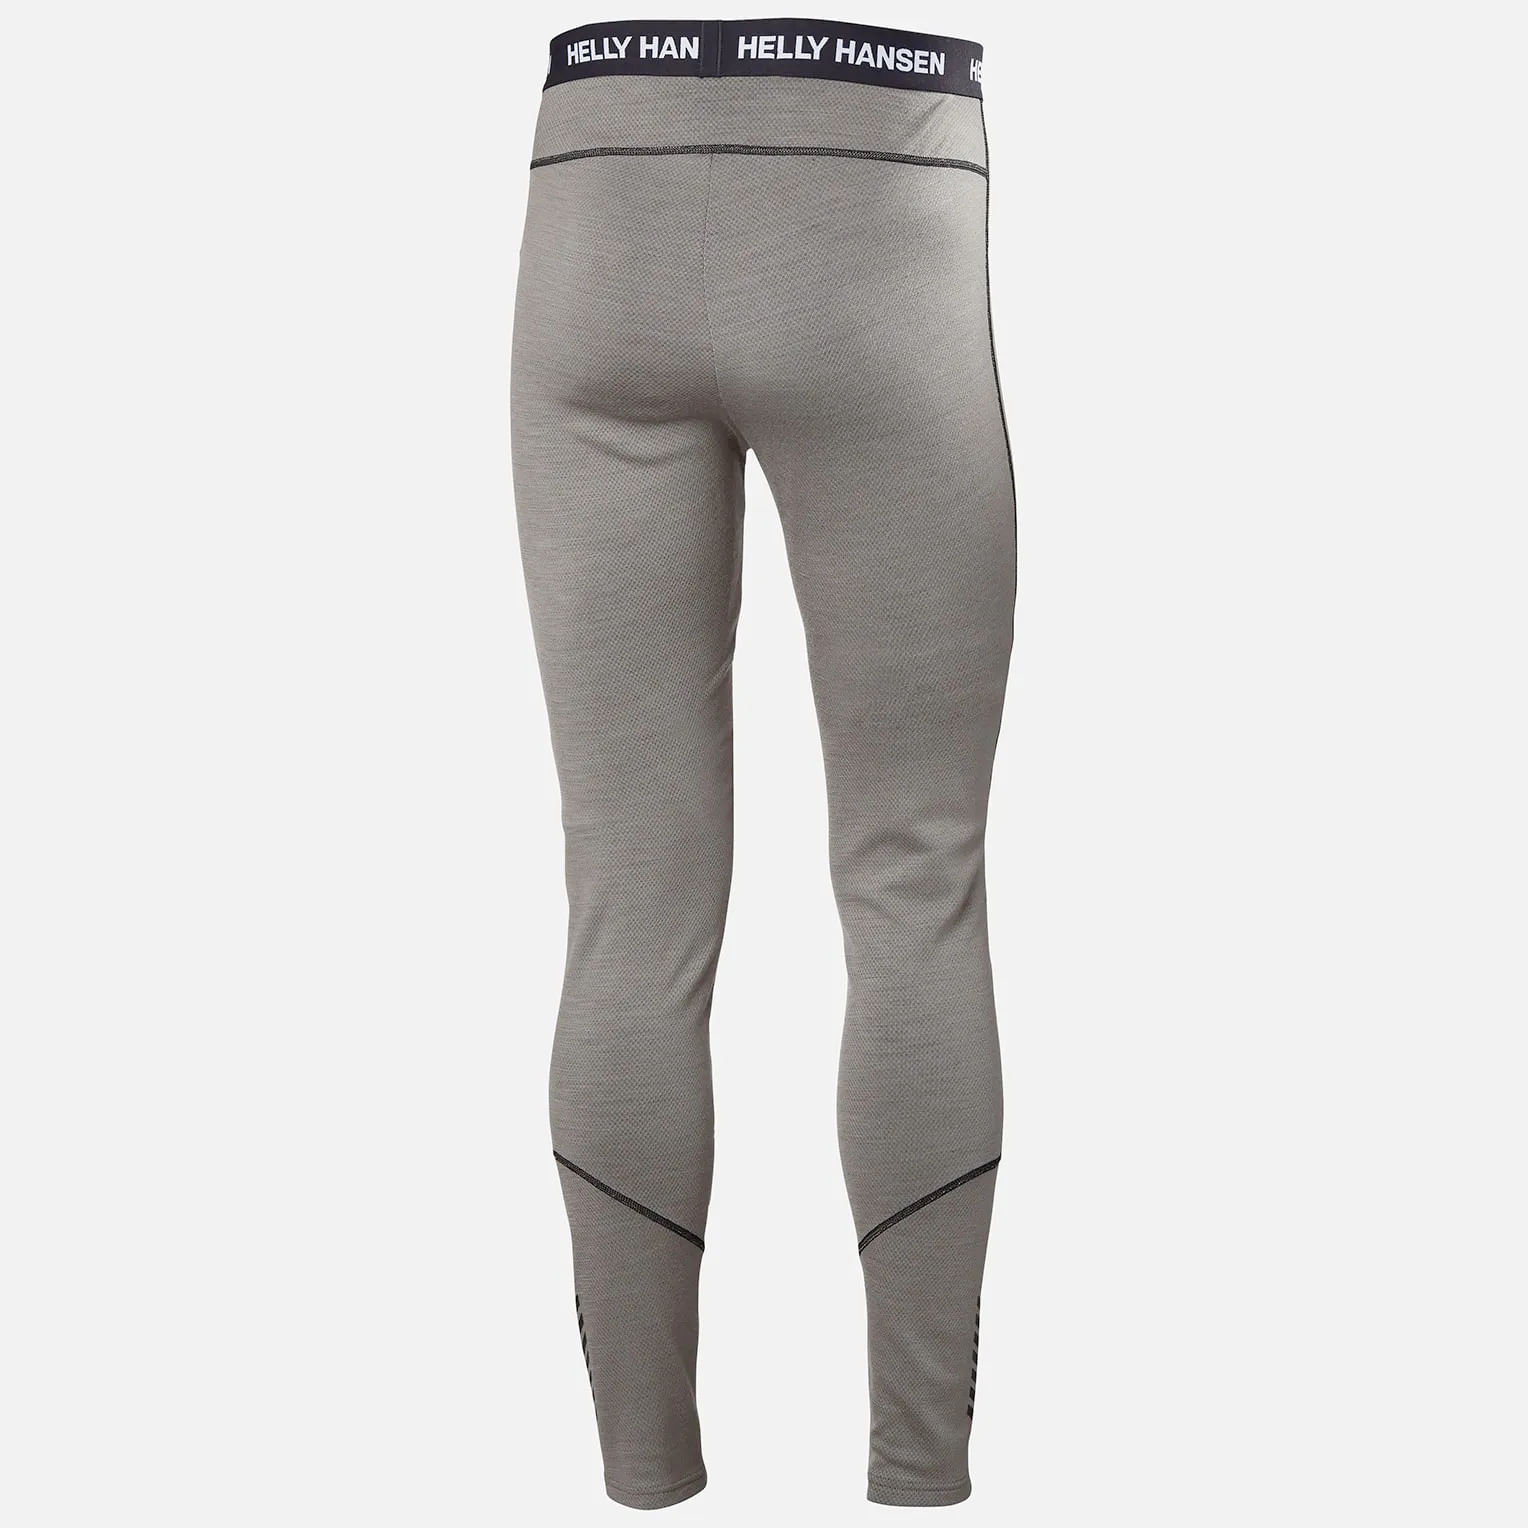 FD Pro 160 Base Layer Tights - Women's